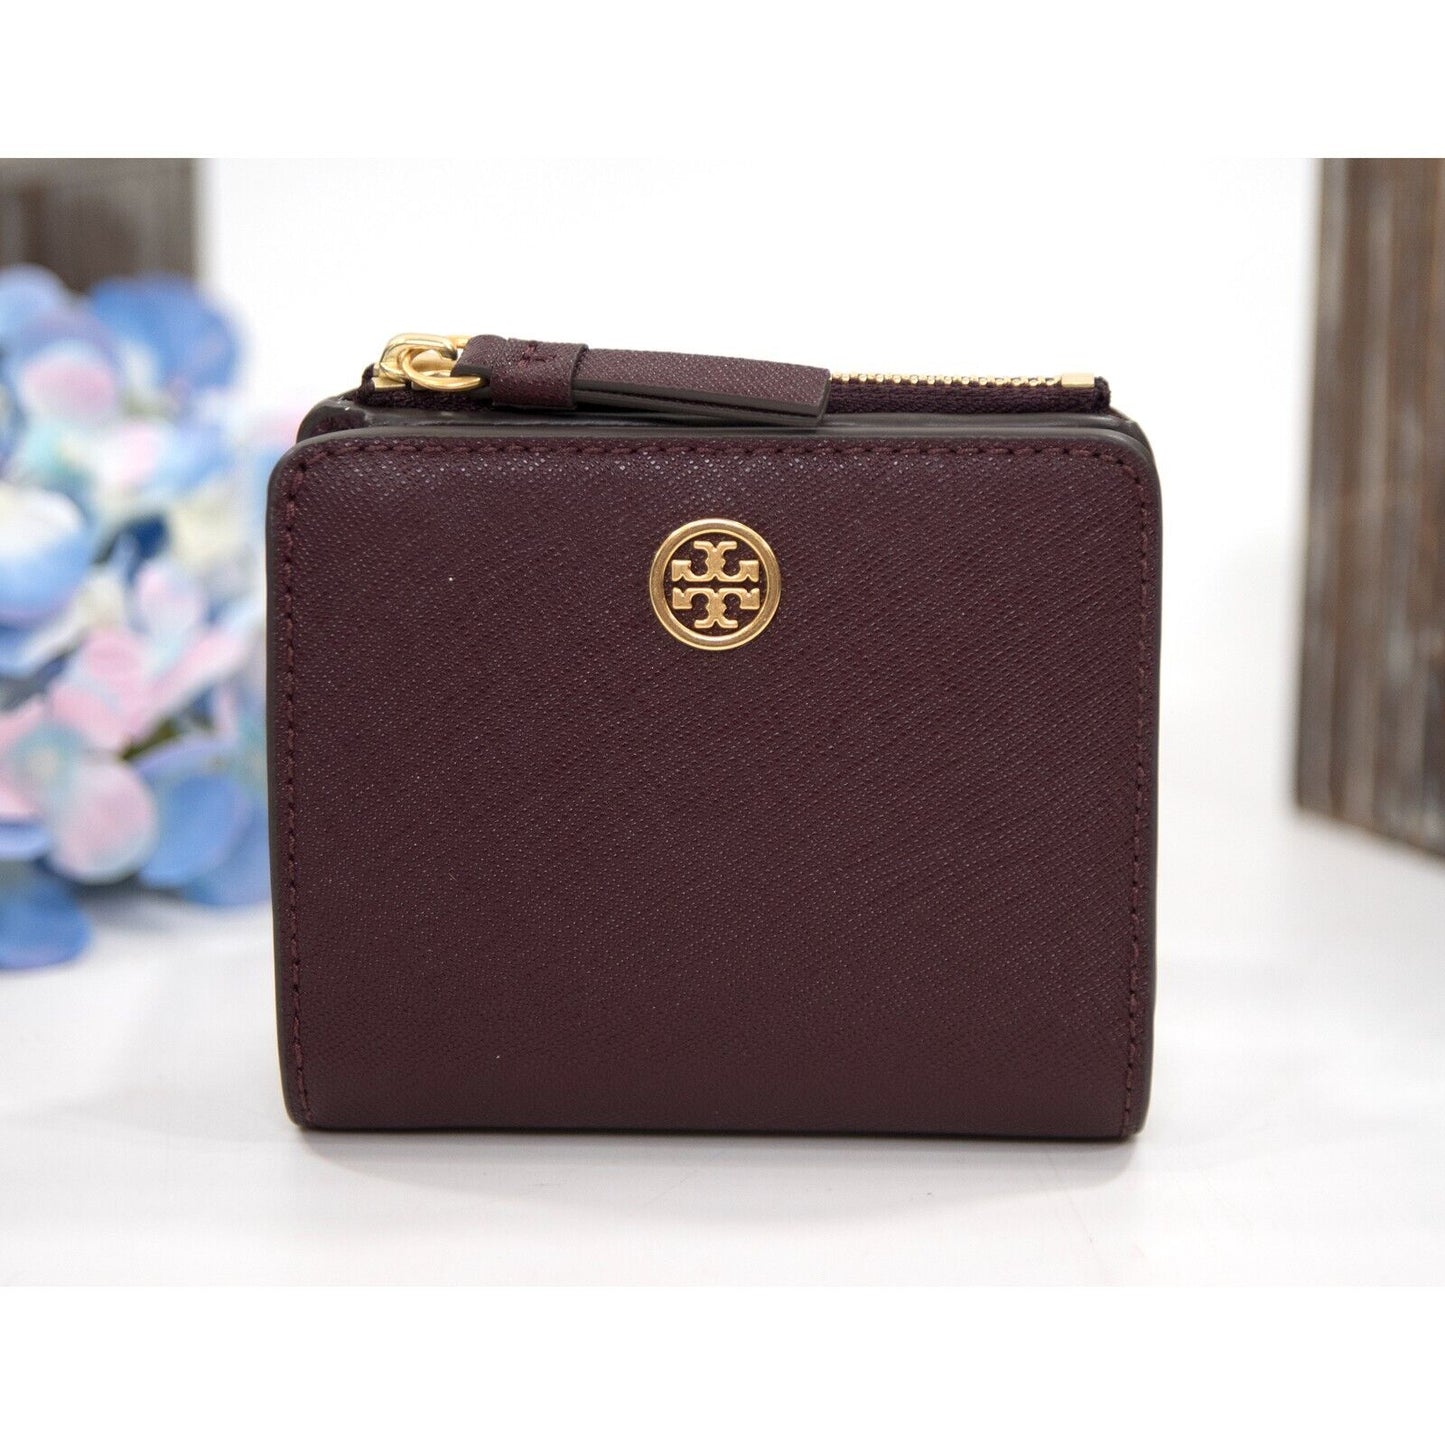 Tory Burch Robinson Port Saffiano Leather Small Compact Wallet NWT